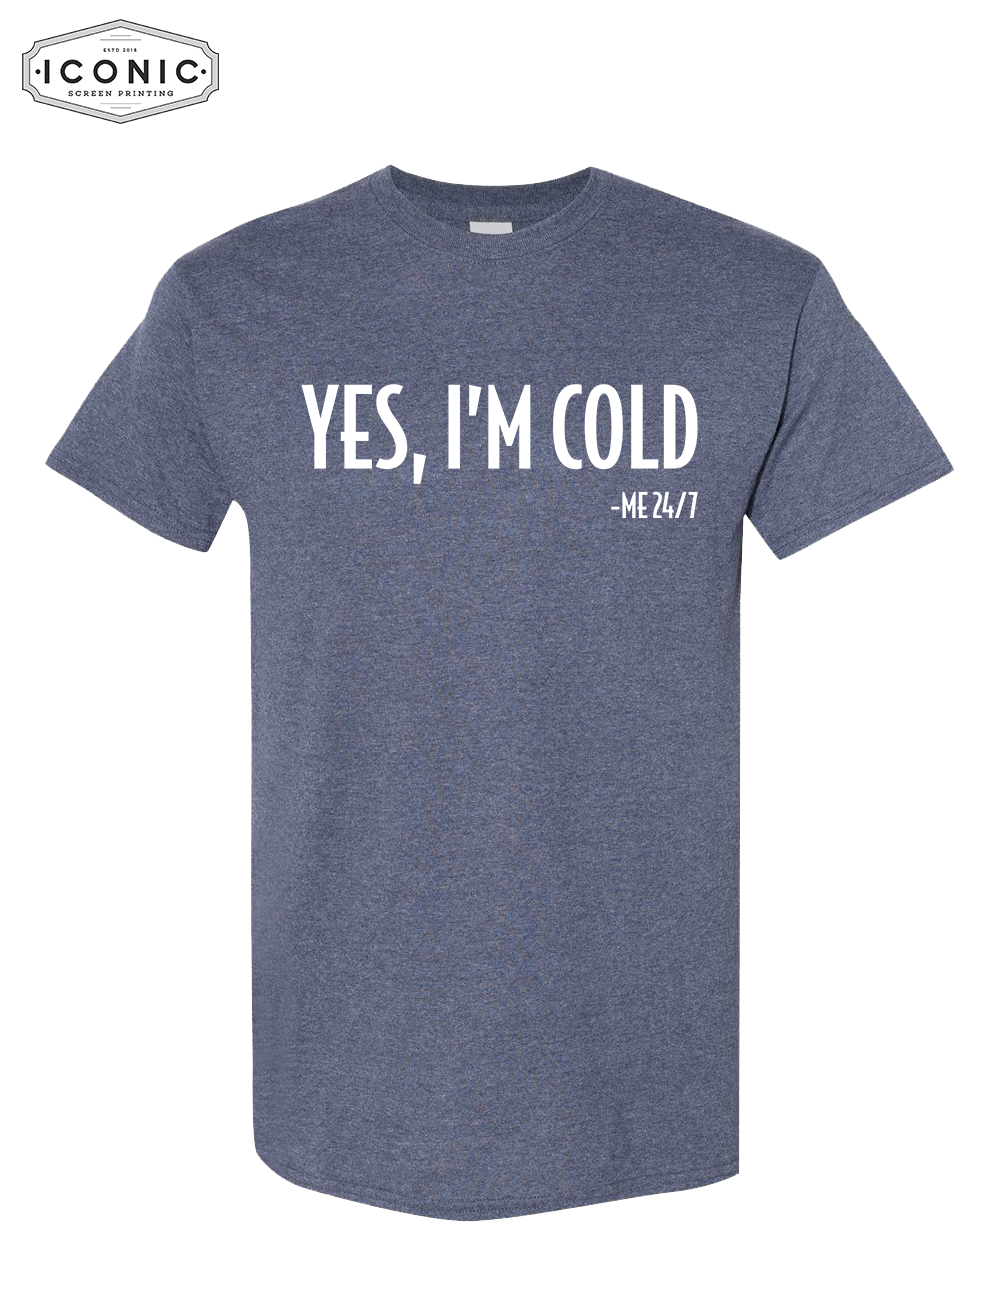 Yes, It's Cold - DryBlend T-shirt